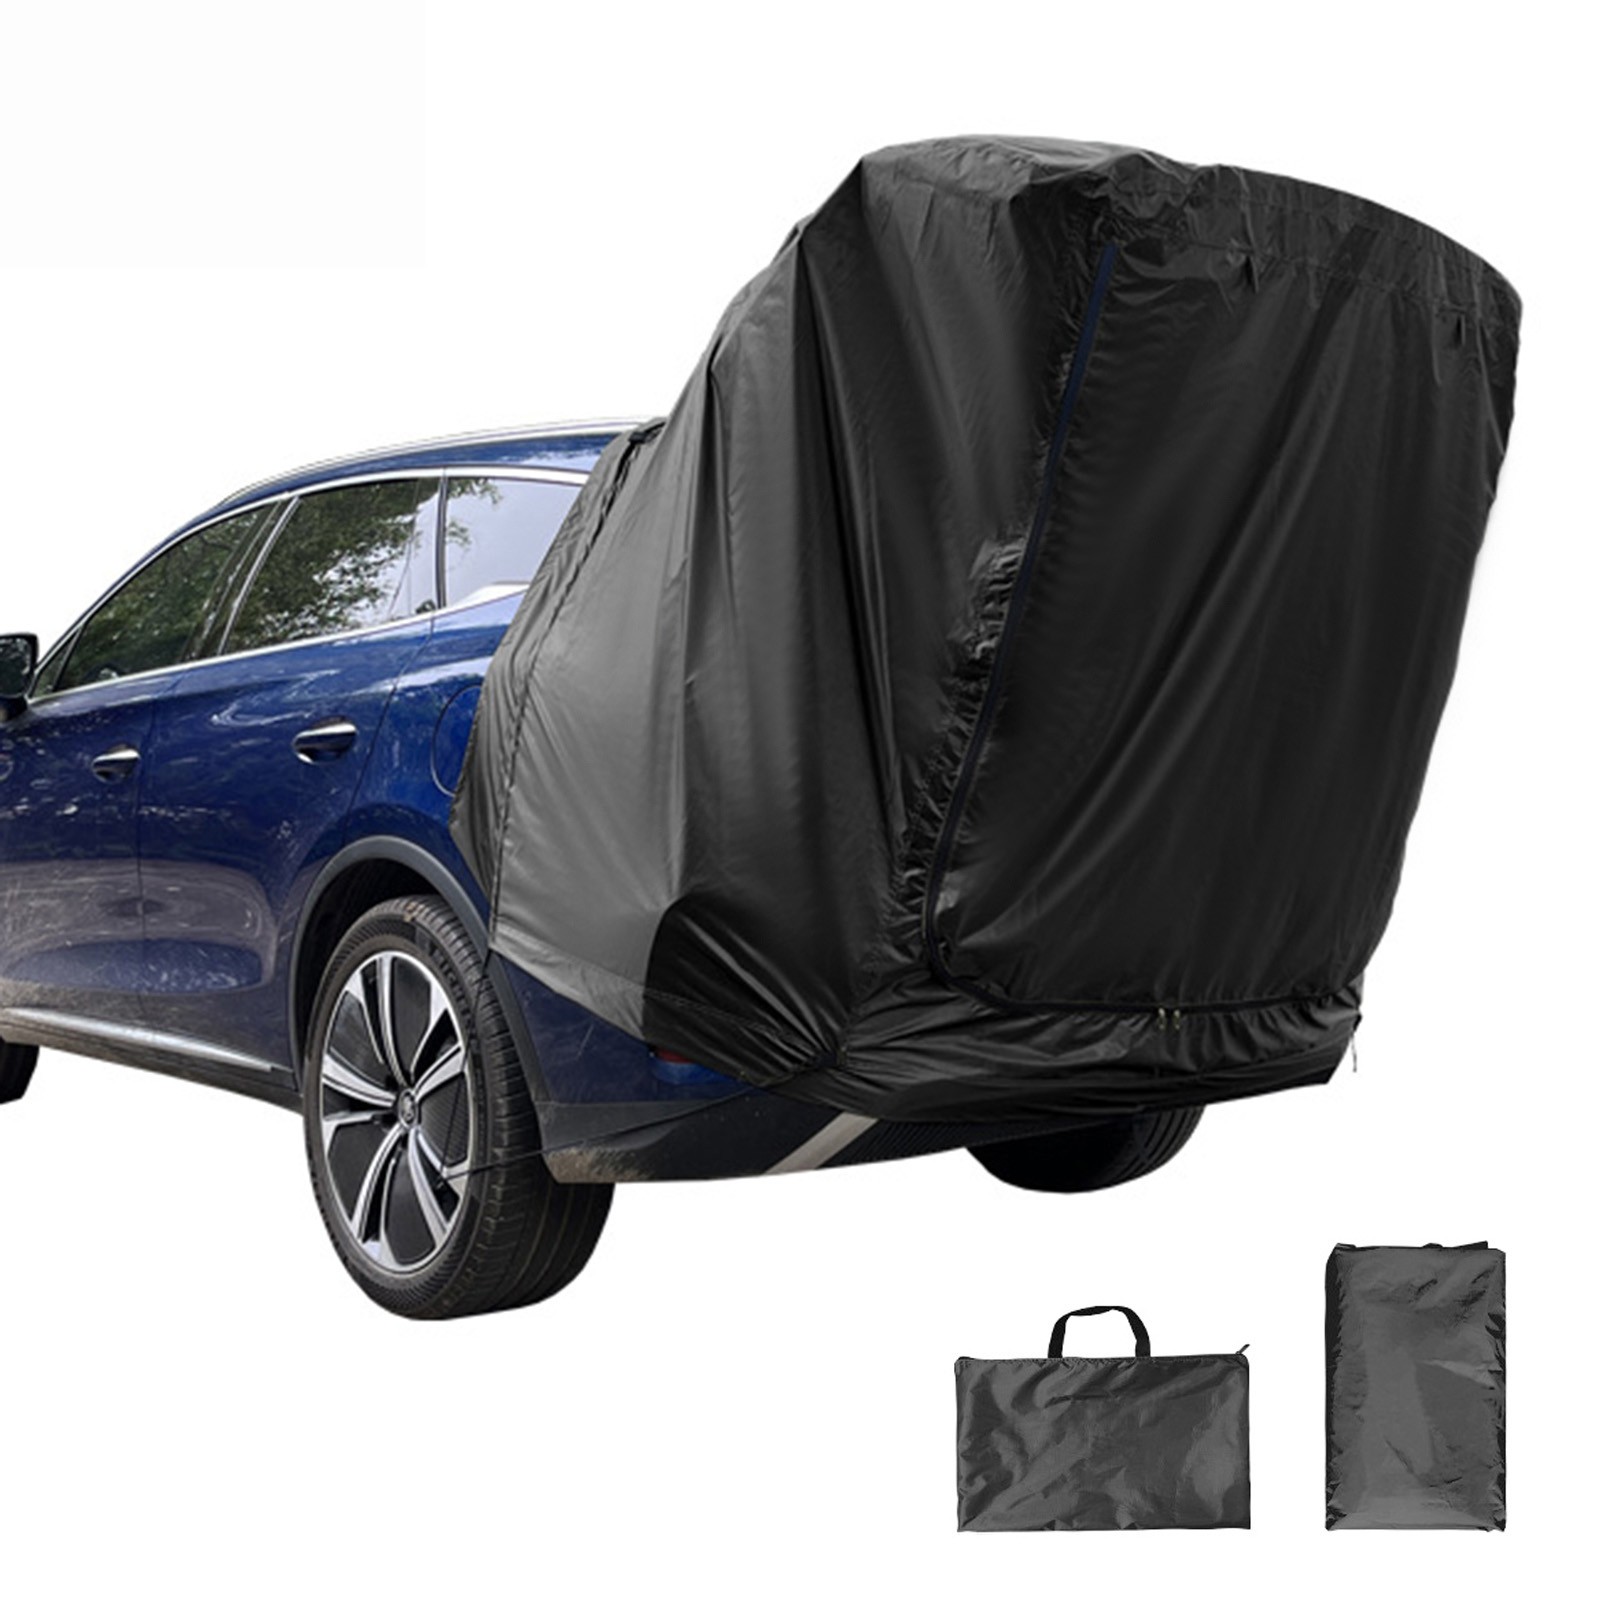 Comfortable and Stylish SUV Cabana Tent Relax and Unwind in Nature's Embrace